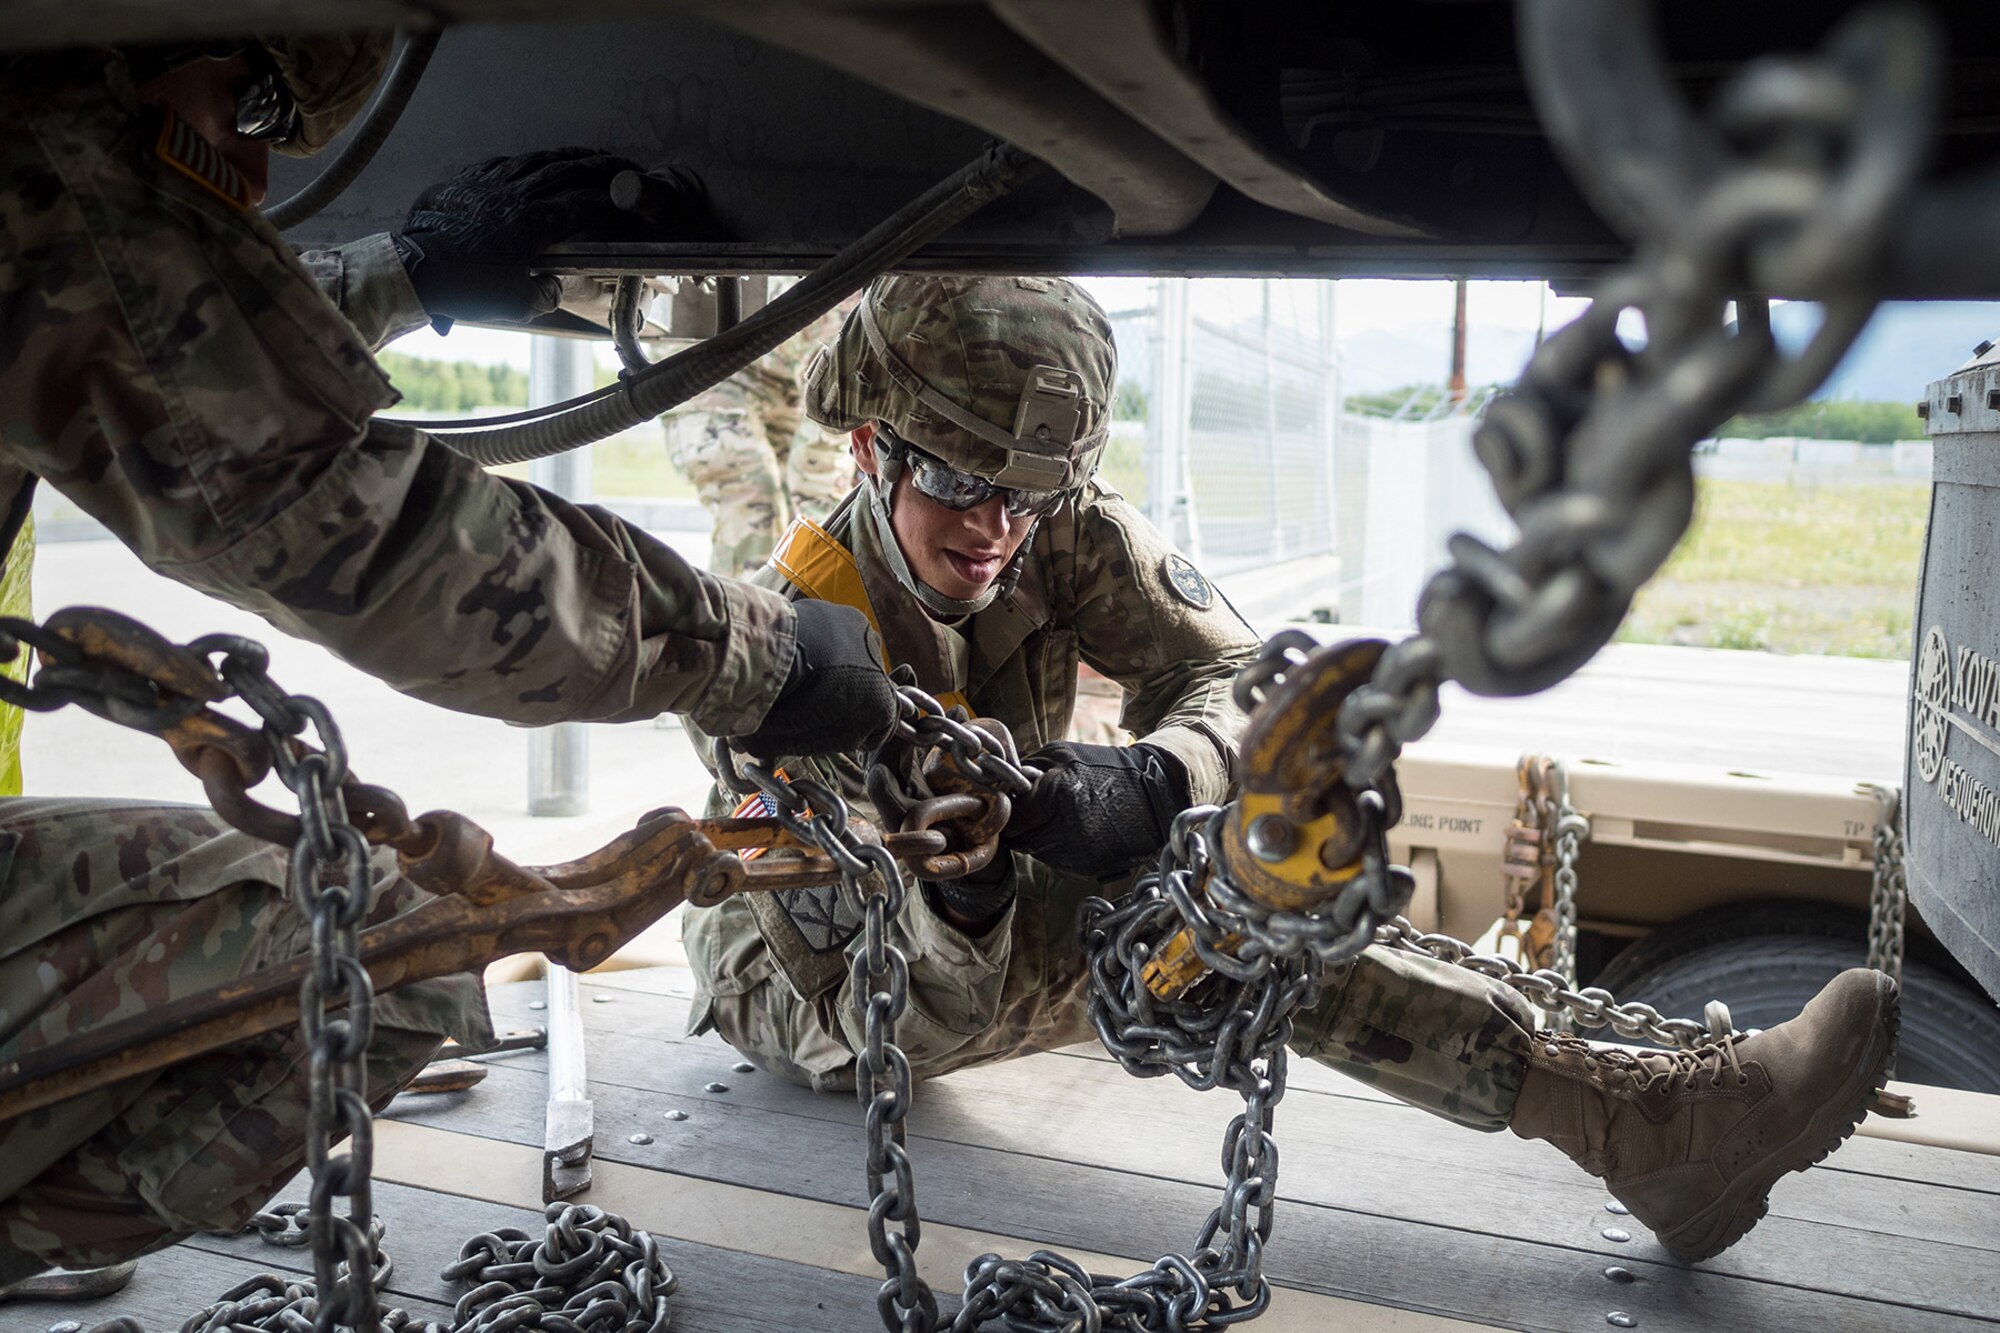 Army Staff Sgt. Jennifer Largen, a native of Orange County, Va., assigned to the 109th Transportation Company "Muleskinners", 17th Combat Sustainment Support Battalion, U.S. Army Alaska, secures a vehicle to a flat bed trailer on Joint Base Elmendorf-Richardson, Alaska, June 28, 2017, in support of a U.S. Air Force exercise. USARAK is at the forefront  of protecting America’s interests in the Asia-Pacific region, and is one of the U.S. military’s most centrally located power projection platforms that benefits from joint training opportunities.